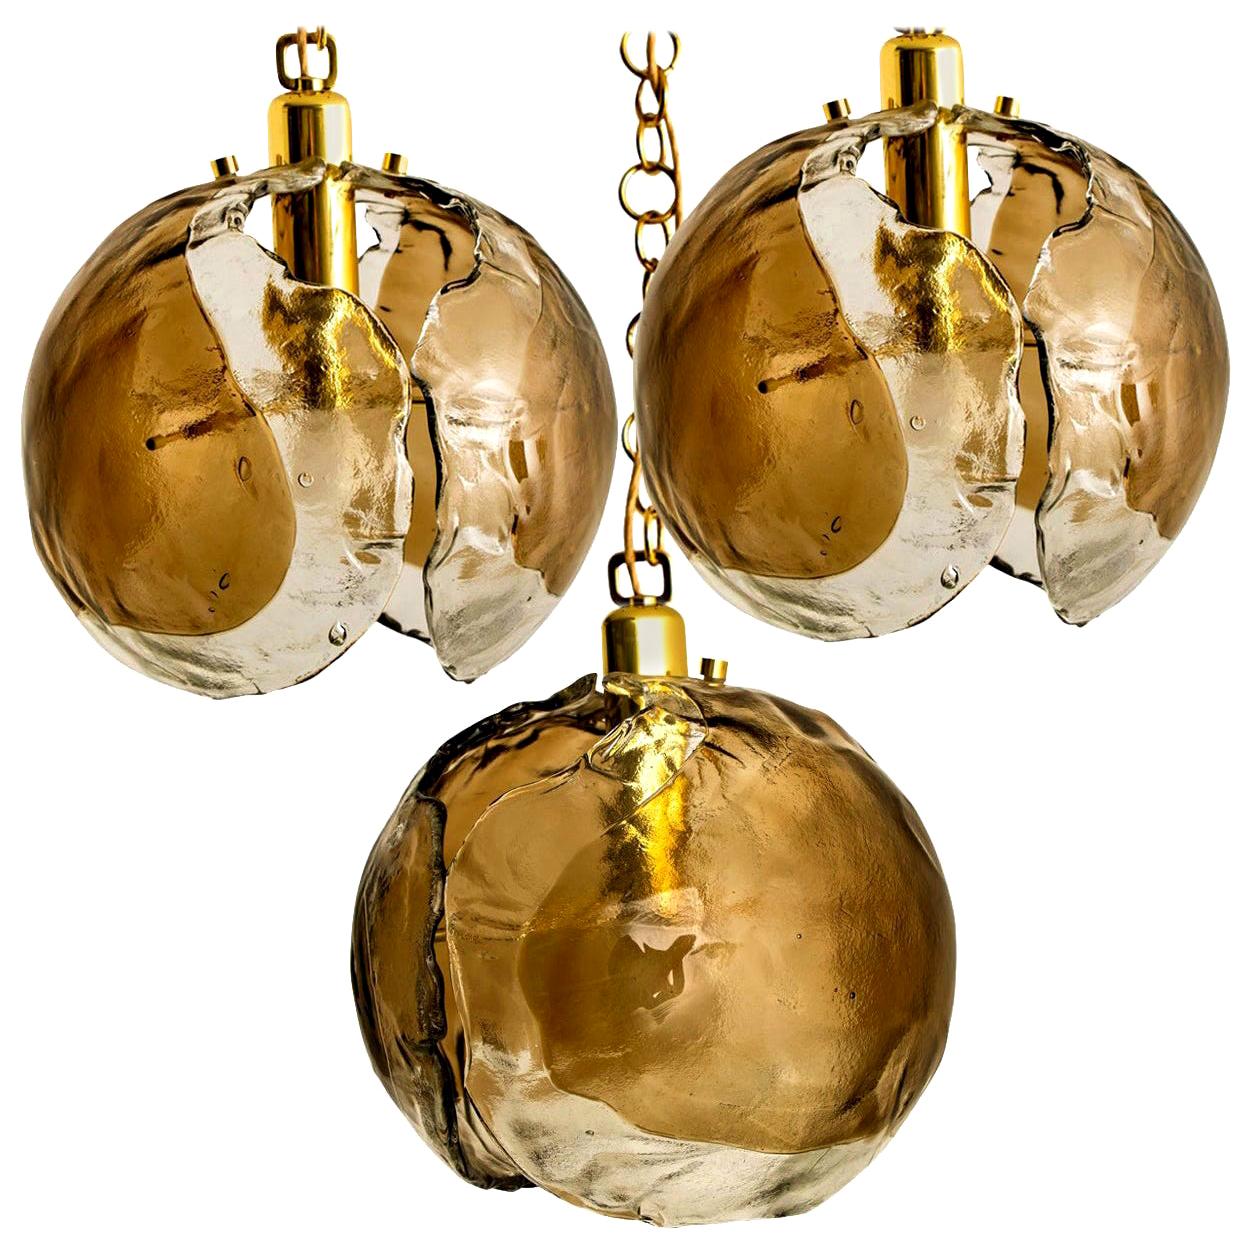 1 of the 3 Kalmar Chandelier Pendant Lights, Smoked Glass and Brass, 1970s